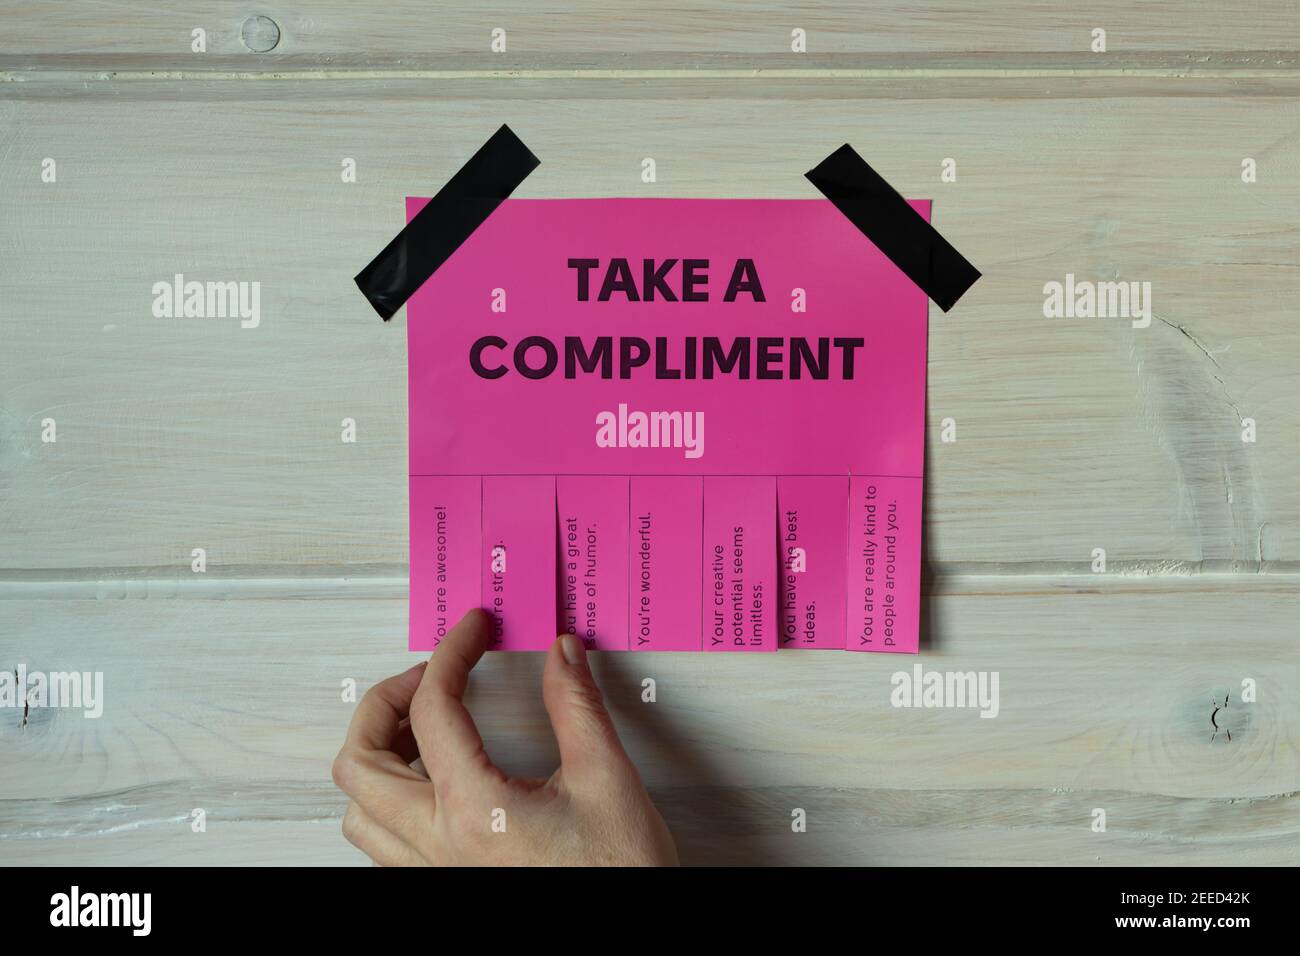 Happy World Compliment Day. Take a compliment. Pink wall paper sticker with text of popular compliments for beautiful lady pasted on wooden background Stock Photo